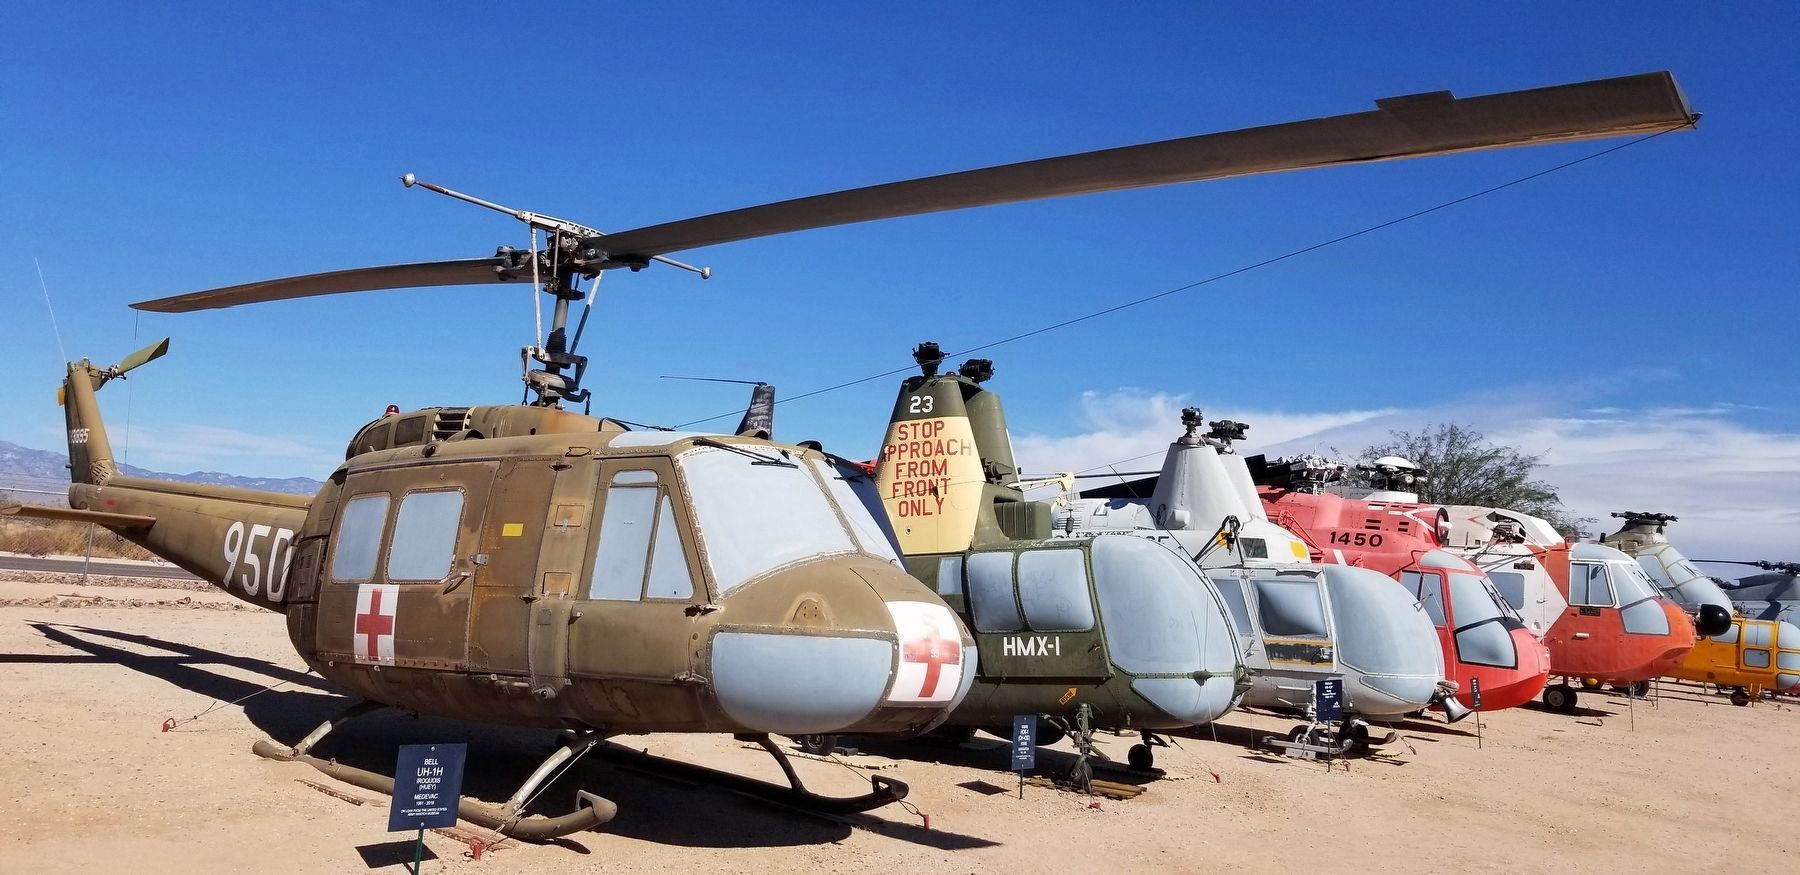 The Bell UH-1H Iroquois (Huey) with other helicopters at the Pima Air and Space Museum image. Click for full size.